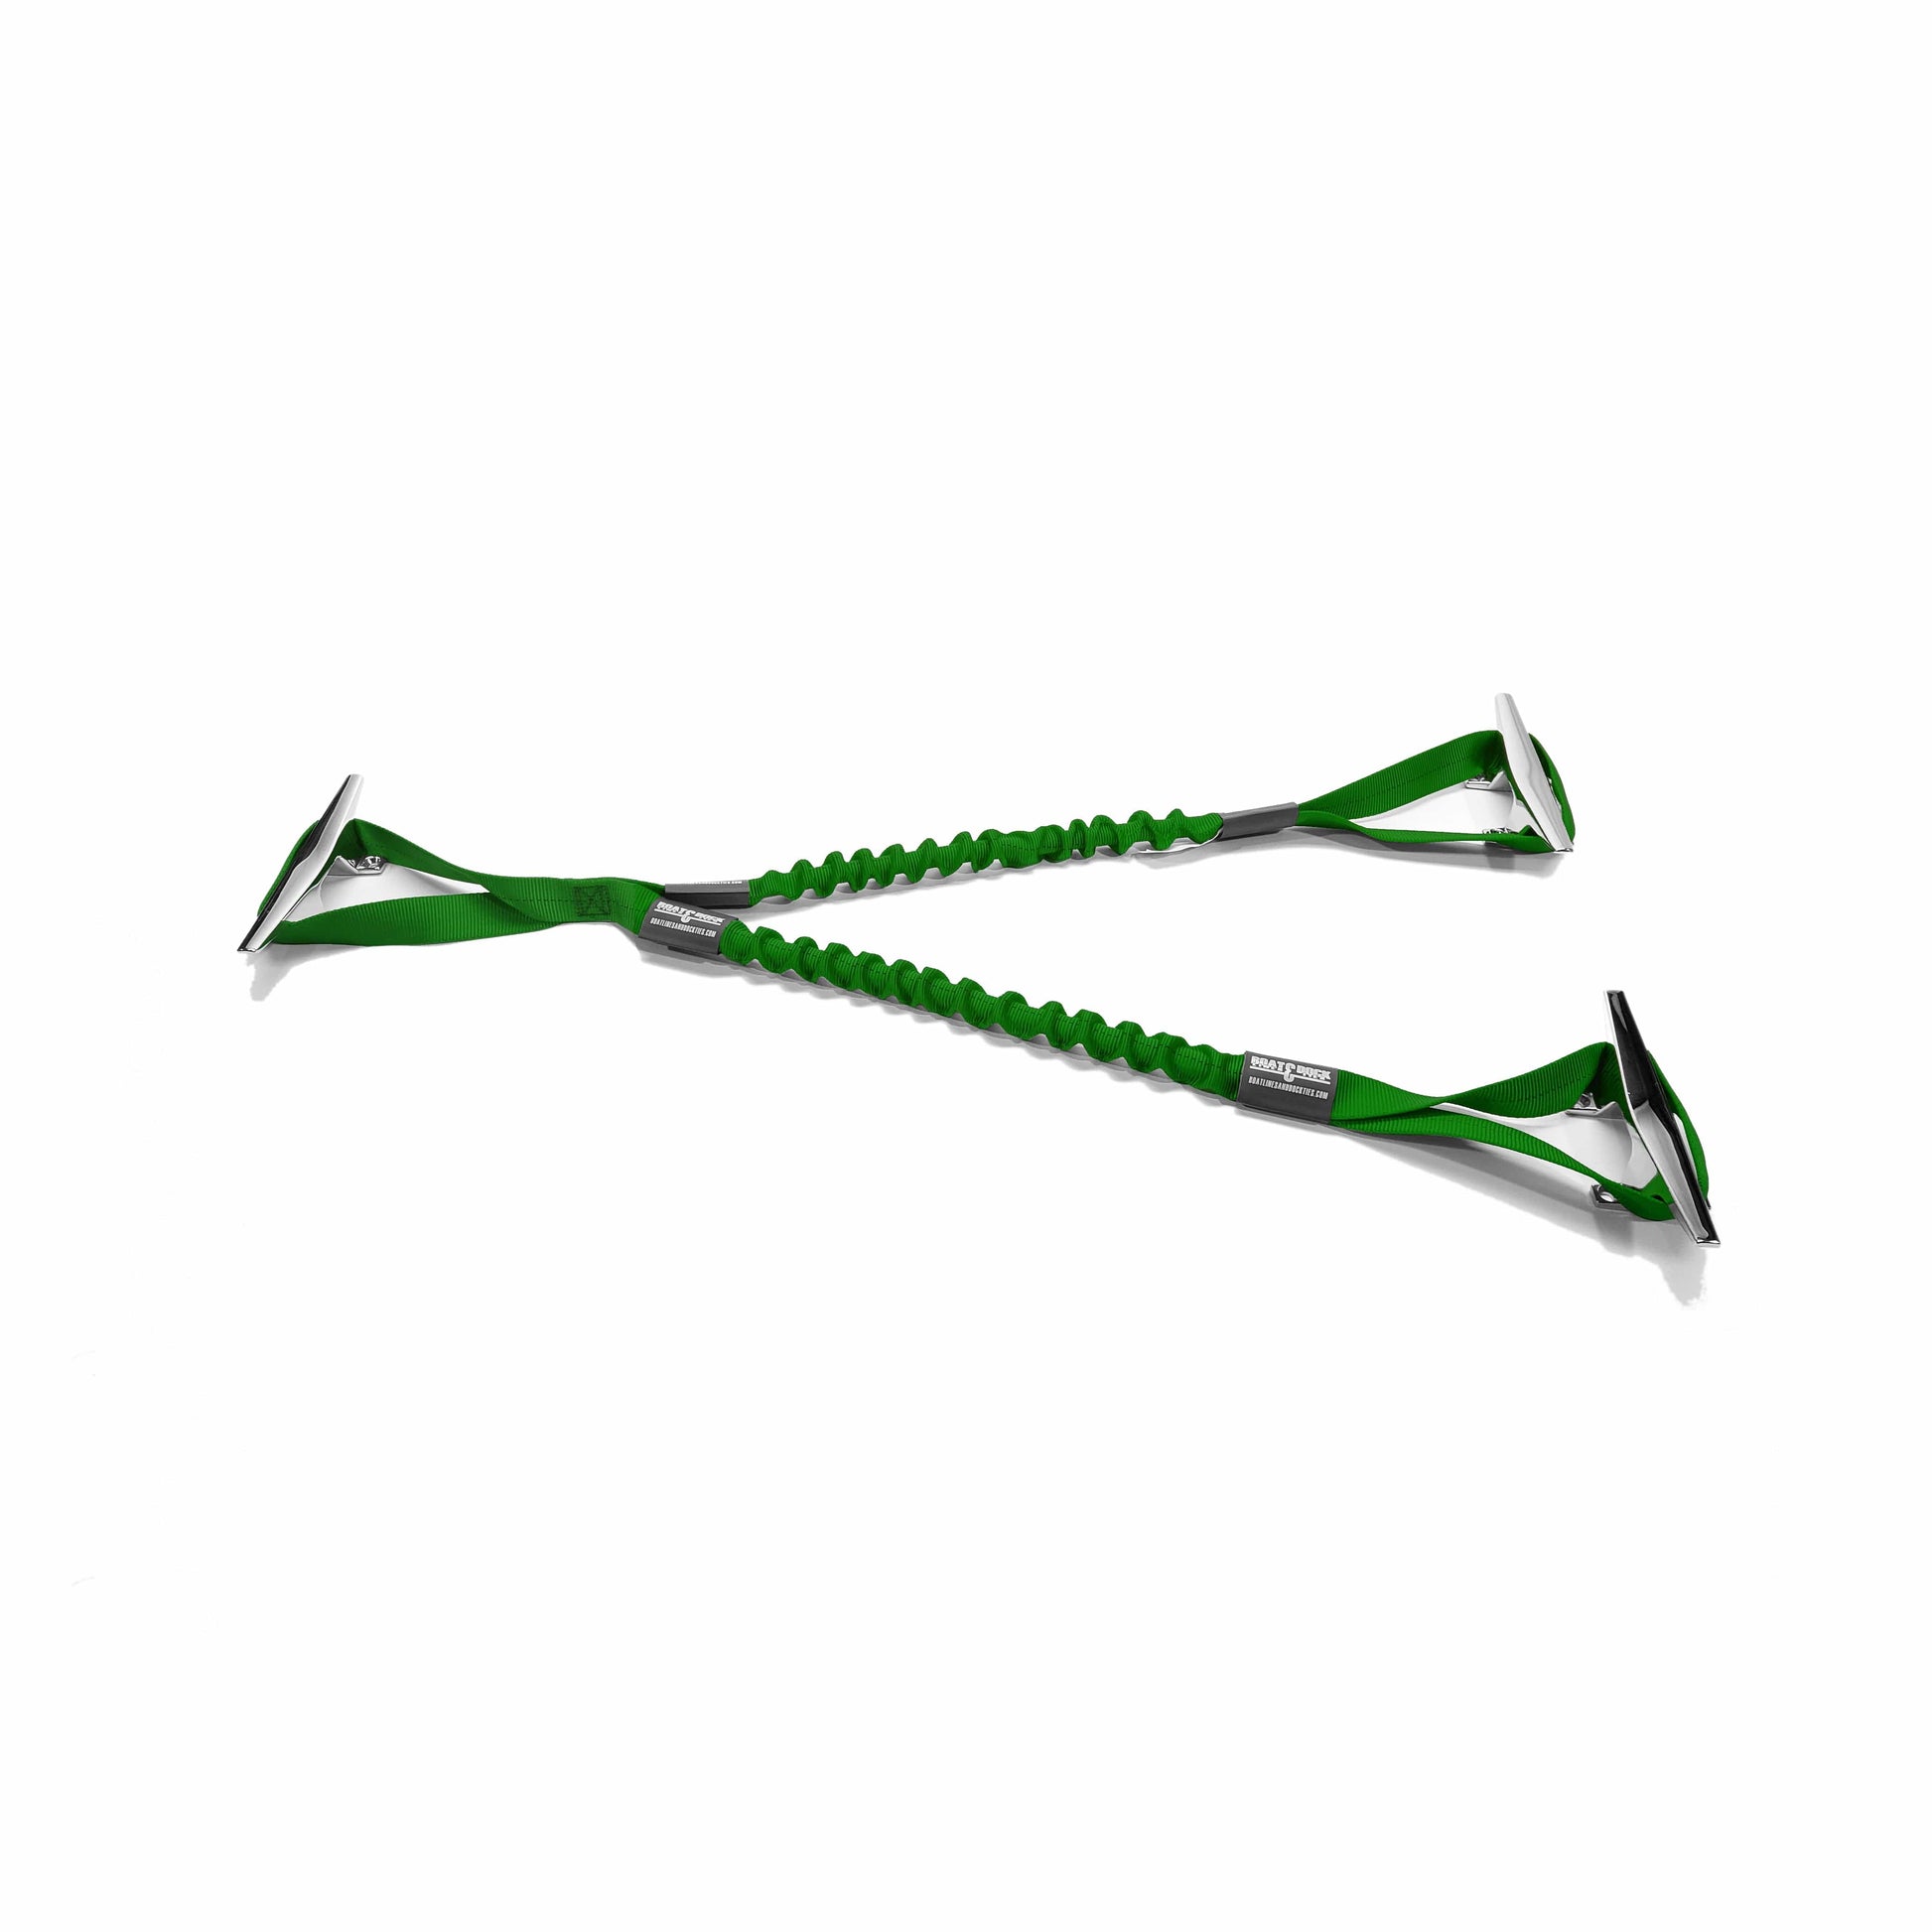 Wake Defender -3 Point Dock Attachment System - 3 Loop Ends - Boat Lines & Dock Ties Boat Lines & Dock Ties 24 Inch / Green